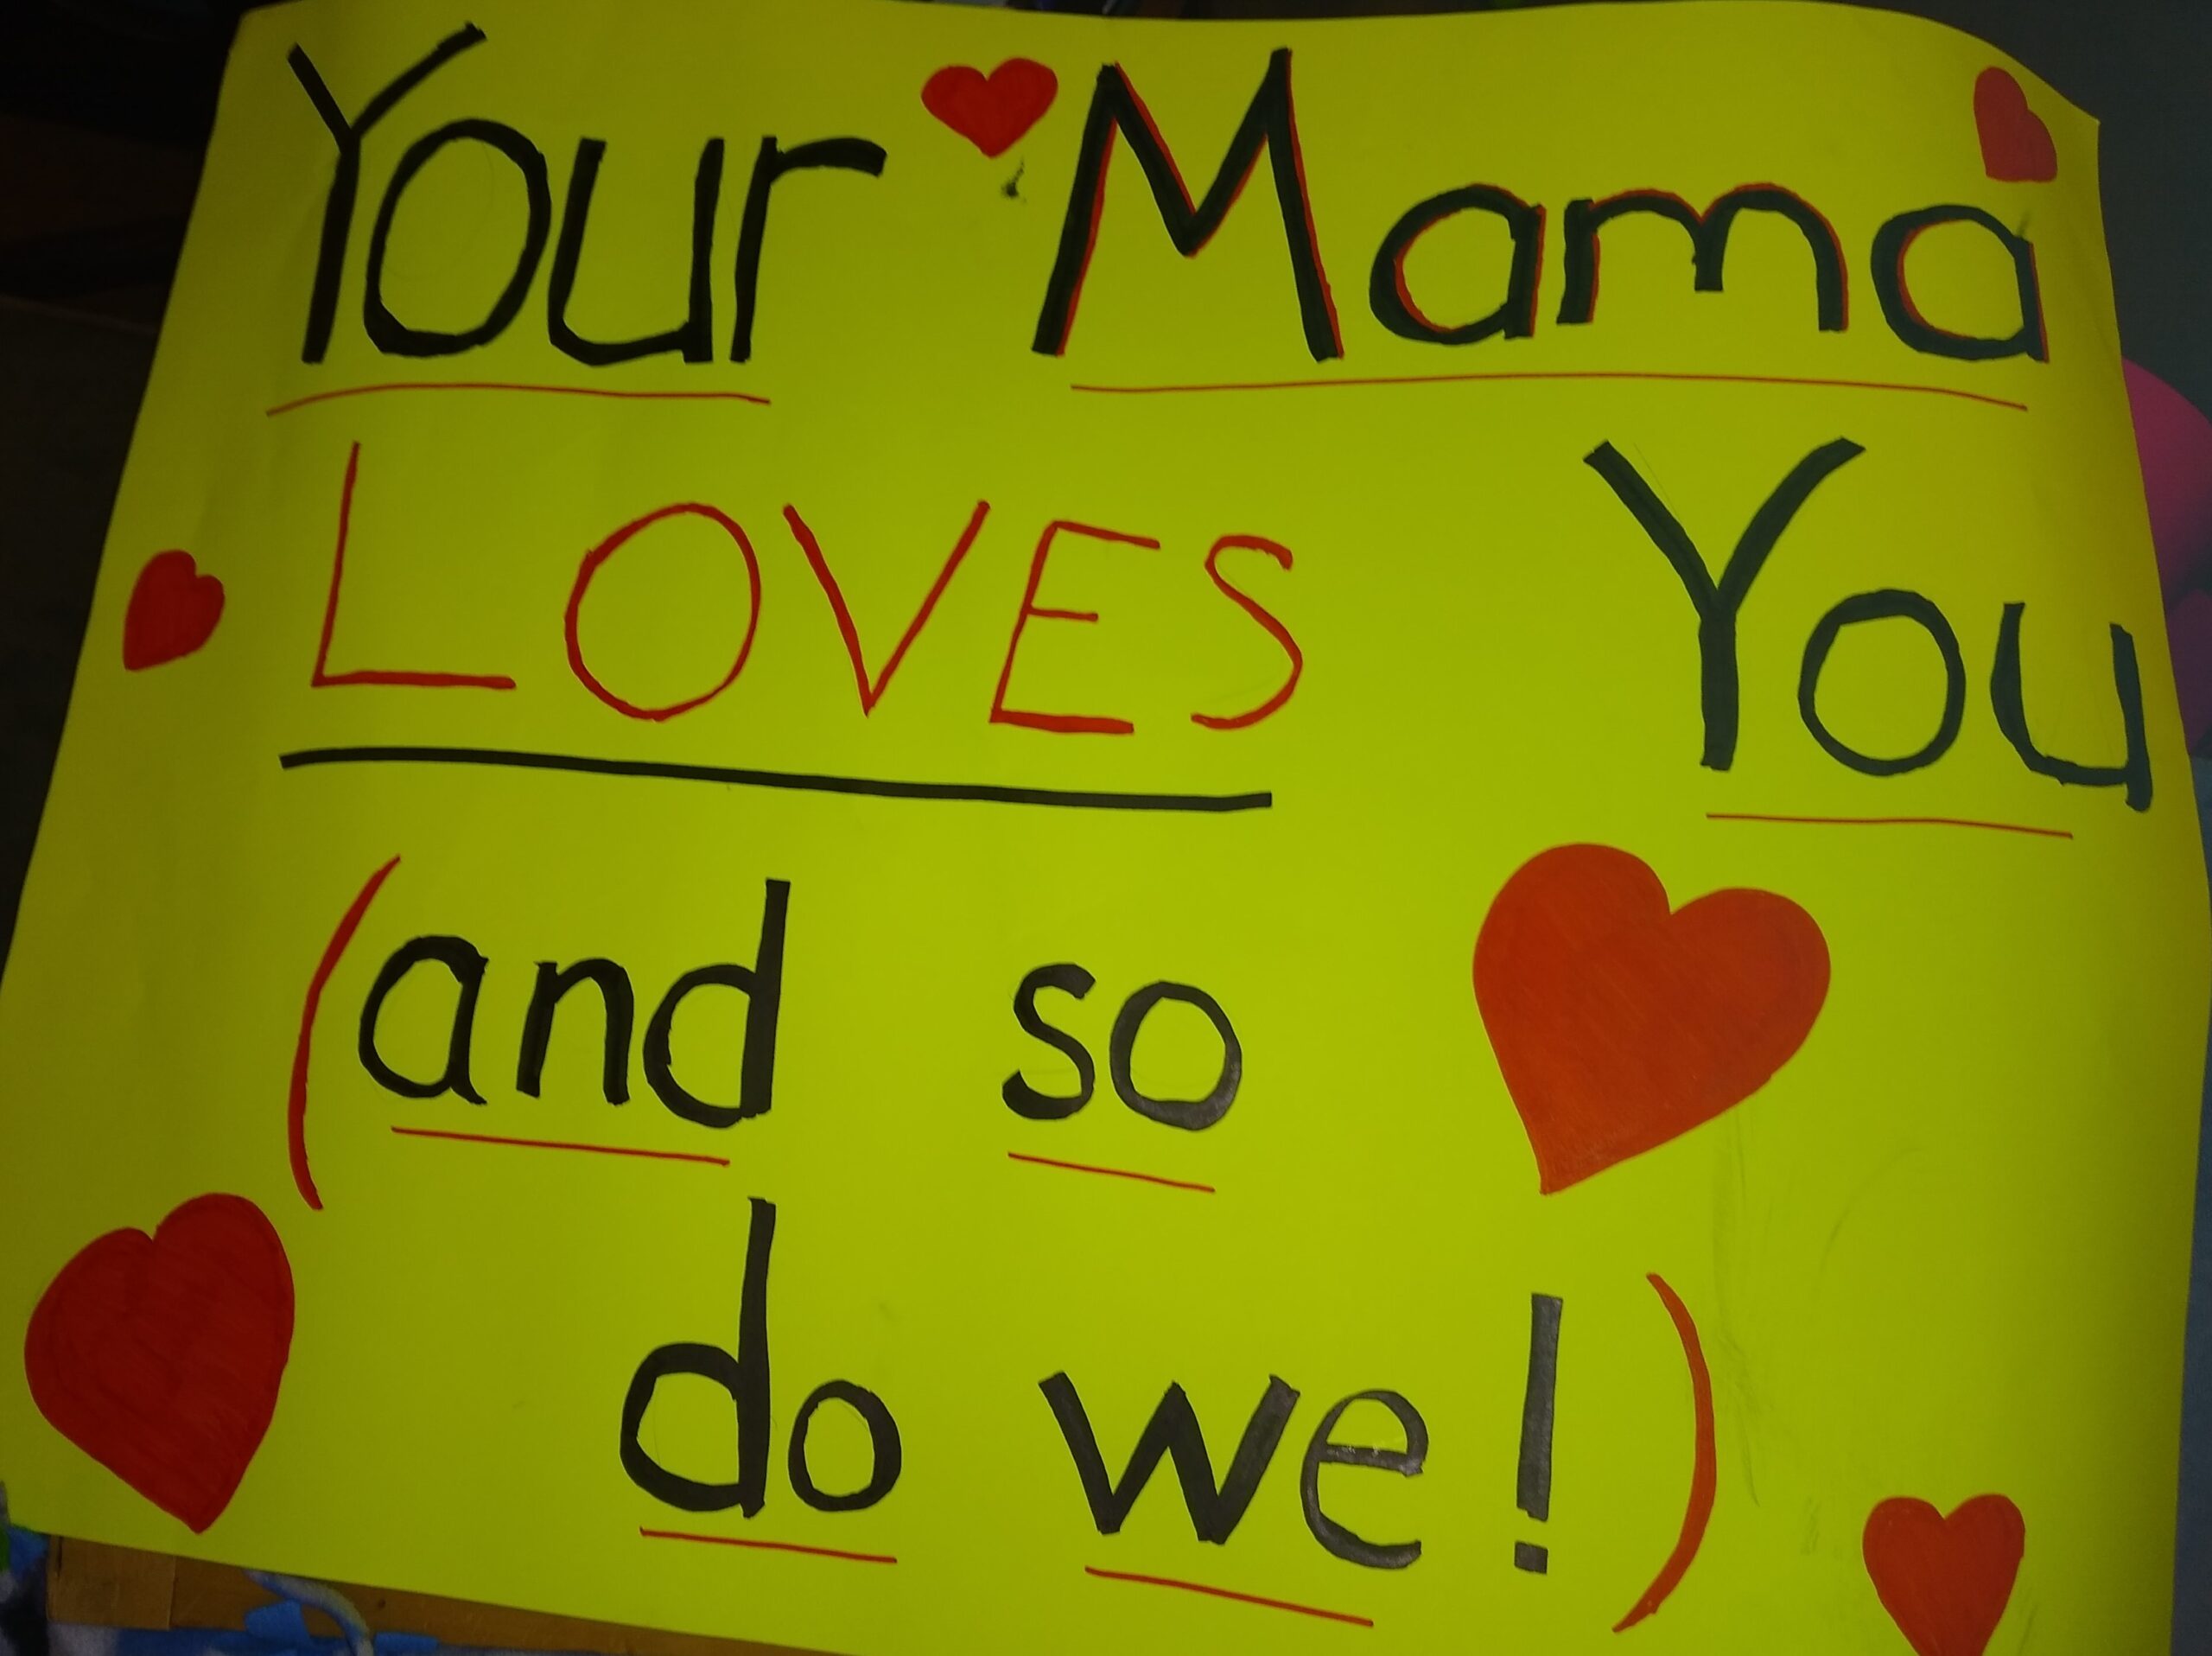 Yellow poster that says "Your Mama loves you (and so do we!)"